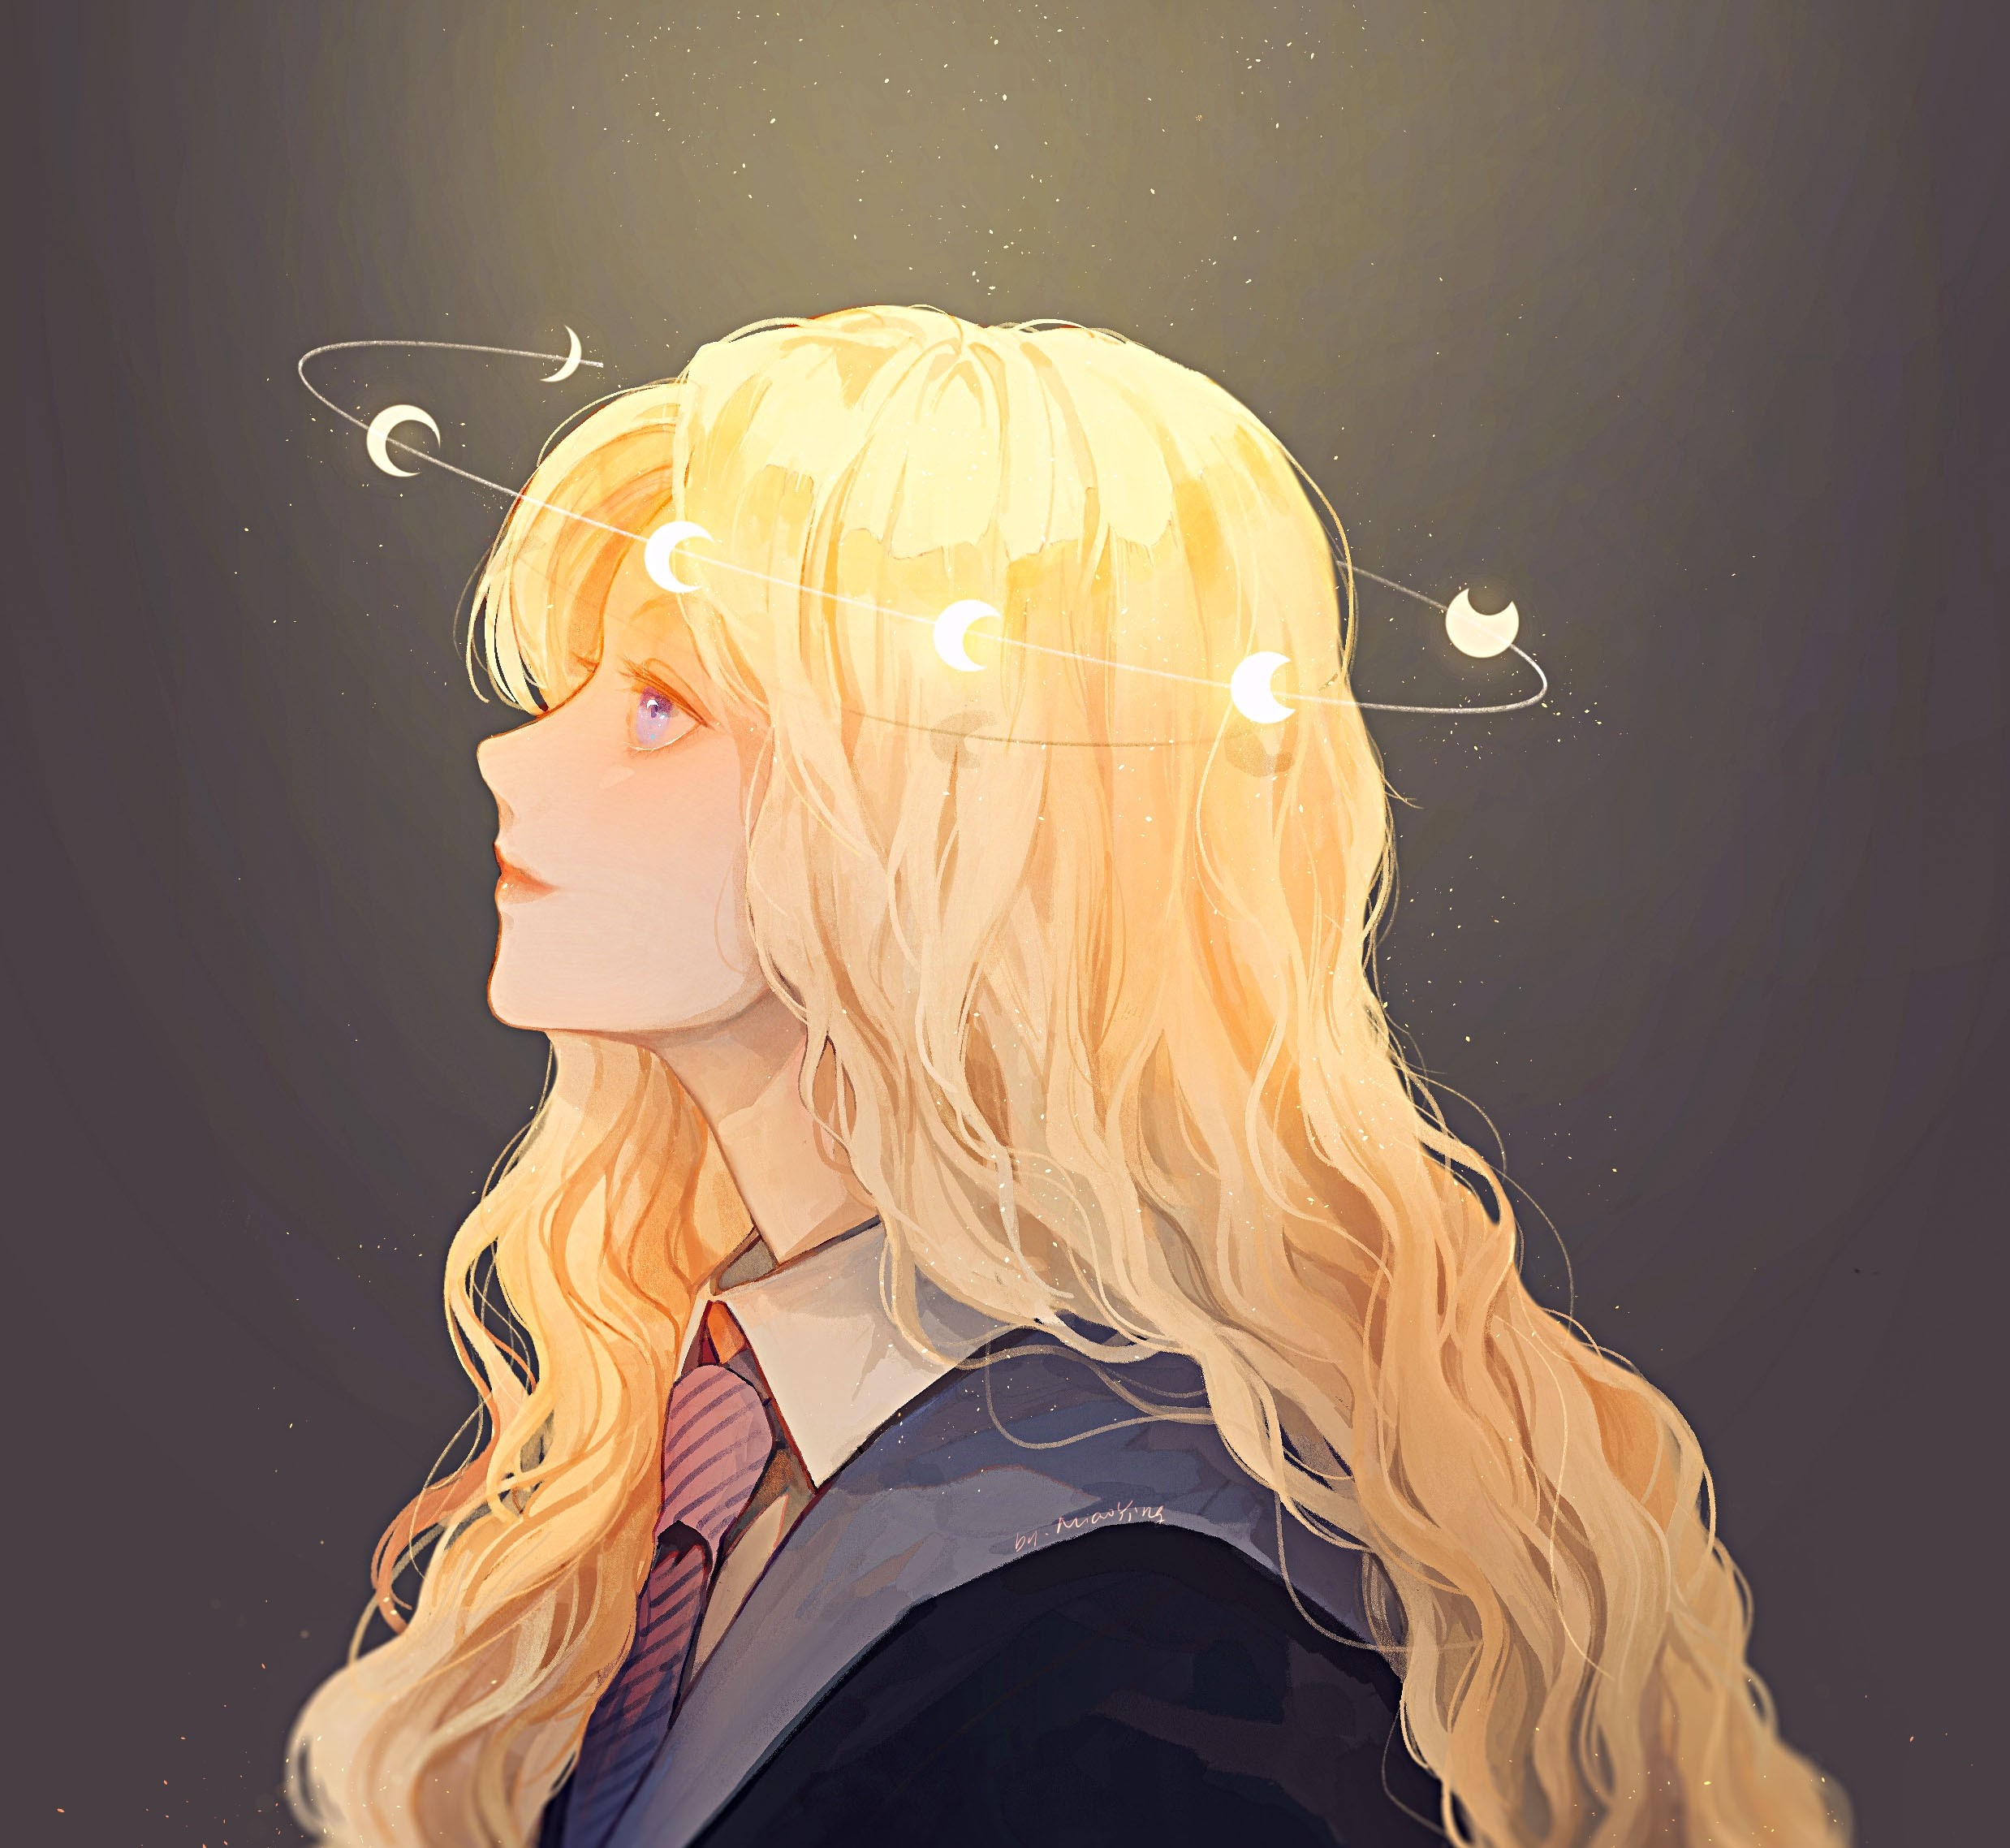 Girl with blonde hair by krzychumen on DeviantArt